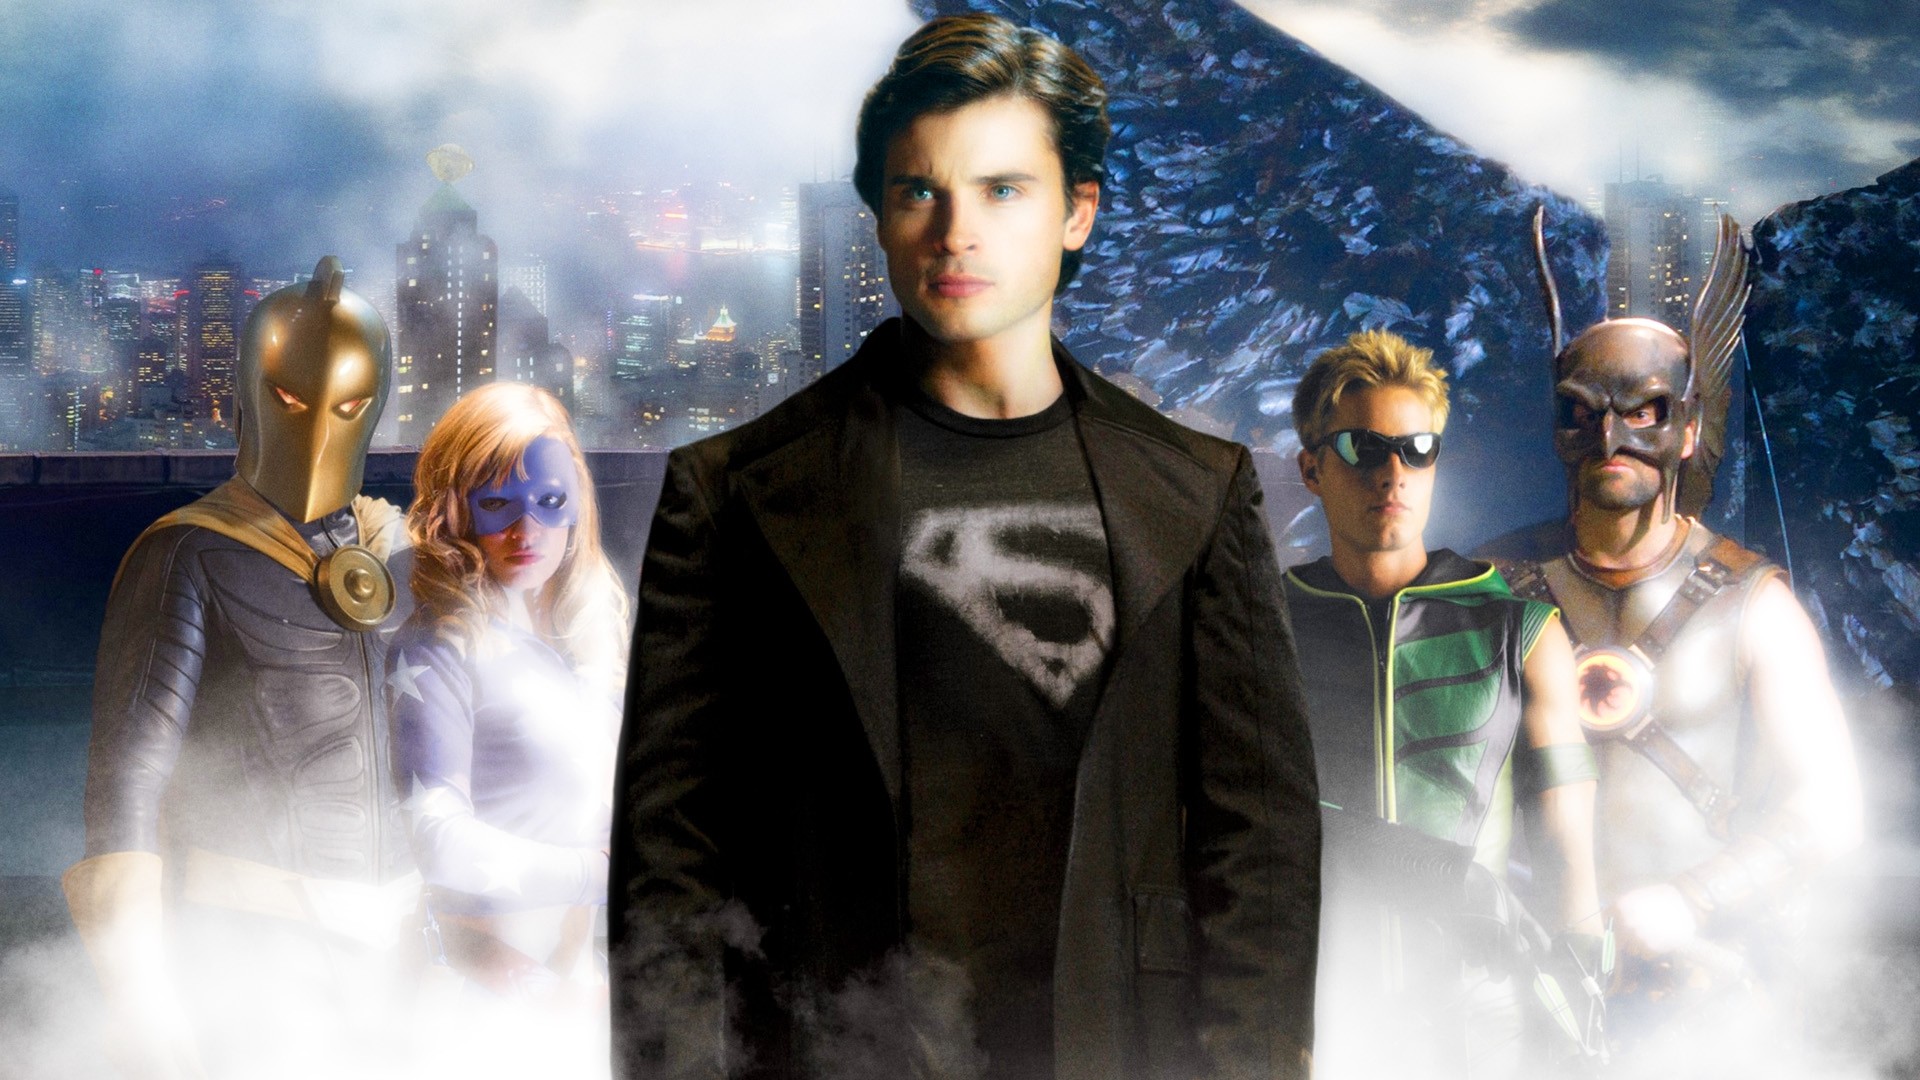 1920x1080 Smallville Source: Keys: smallville, television, wallpaper, wallpapers.  Submitted Anonymously 5 years ago